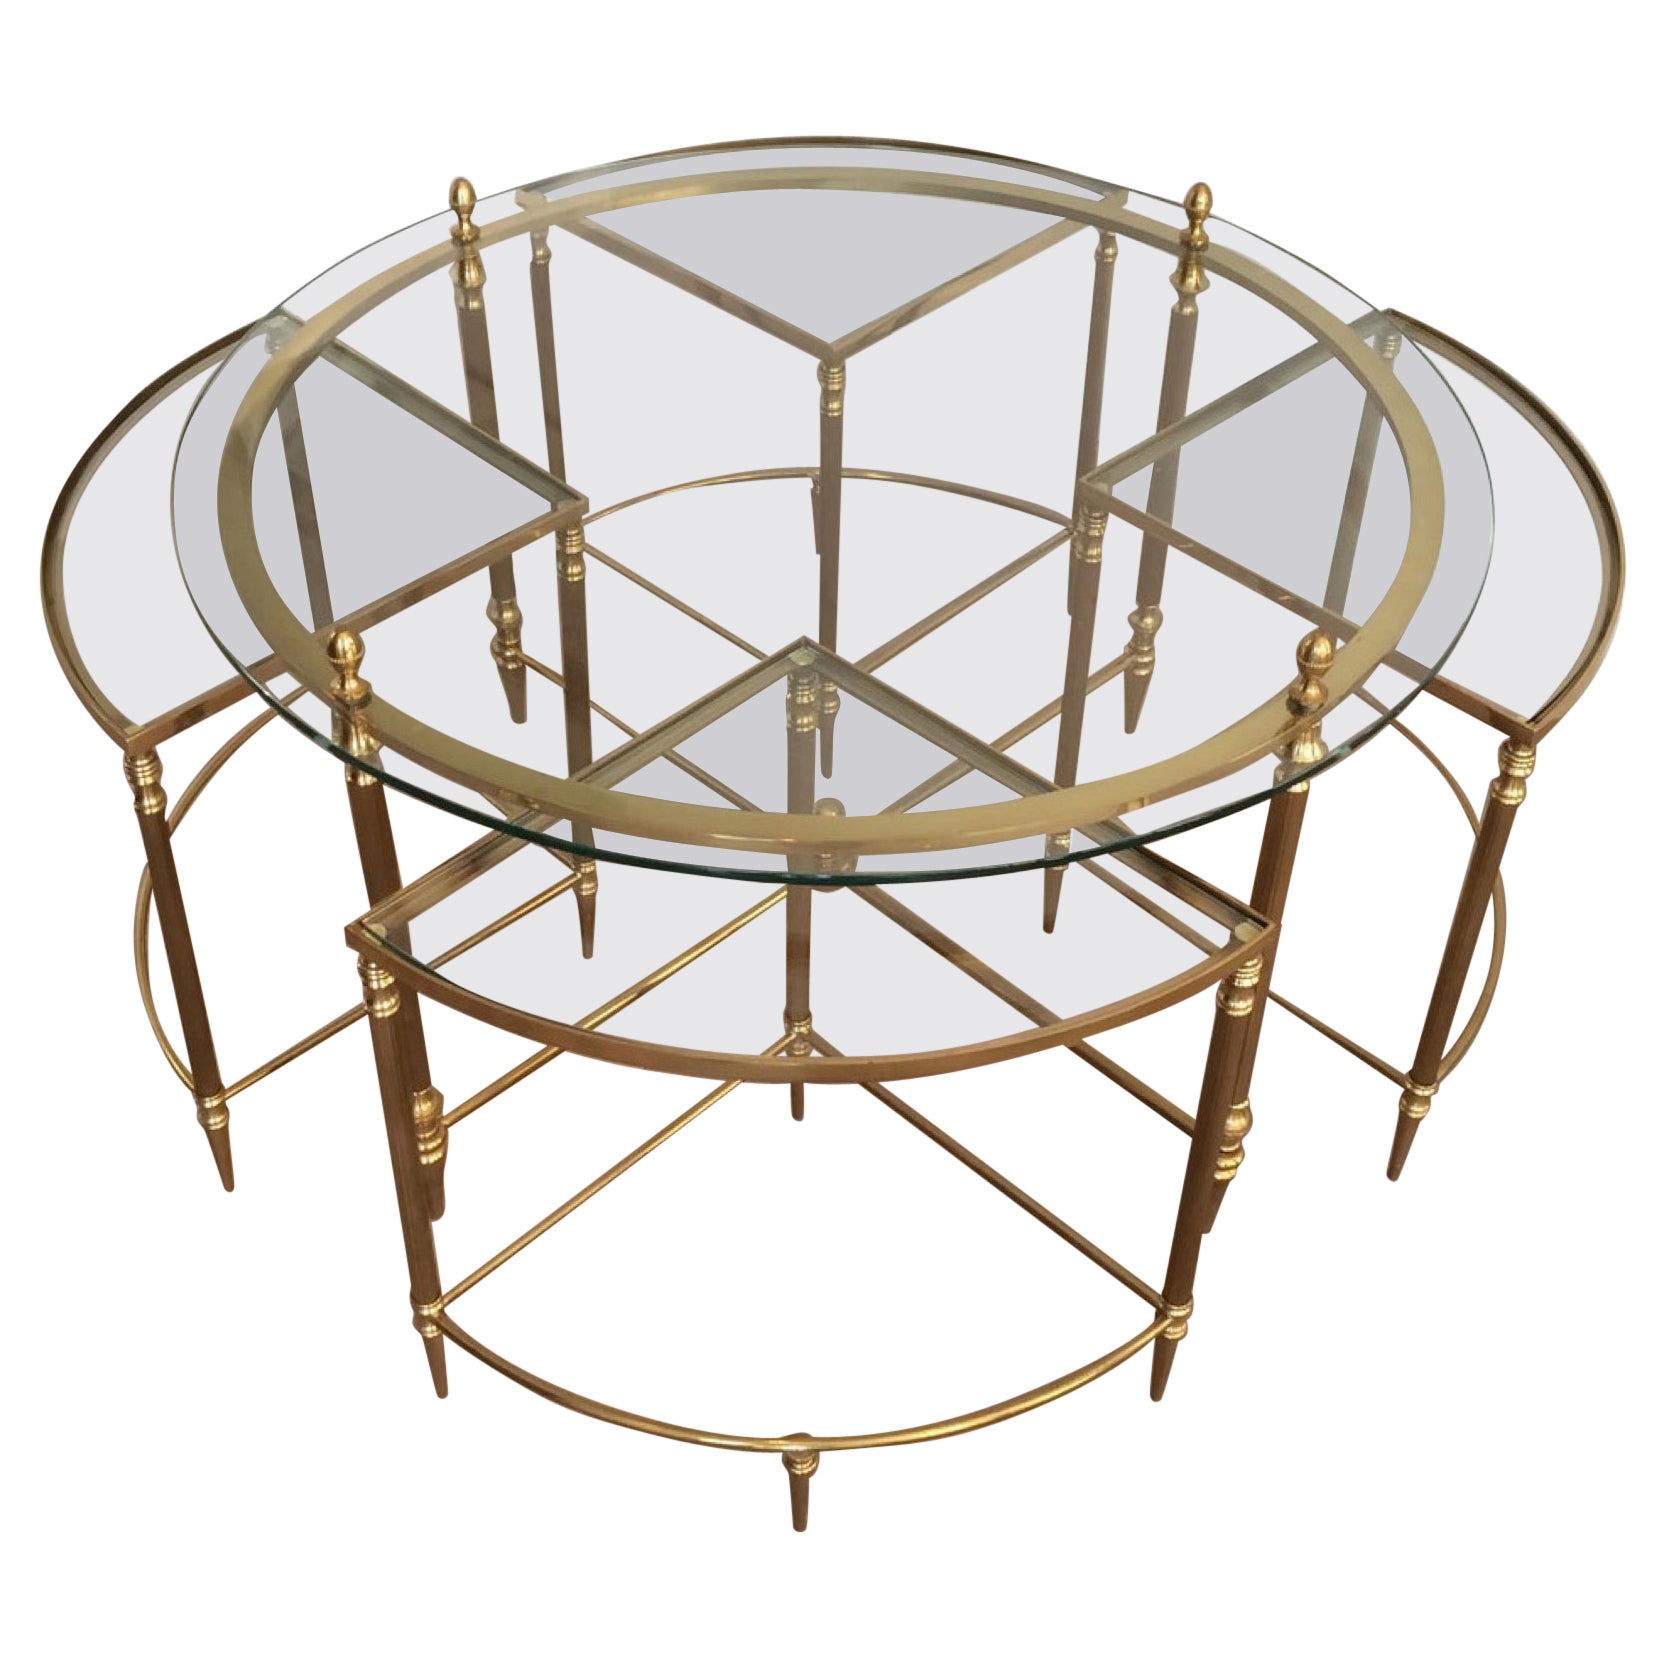 Neoclassical Round Brass Coffee Table with 4 Nesting Tables by Maison Baguès